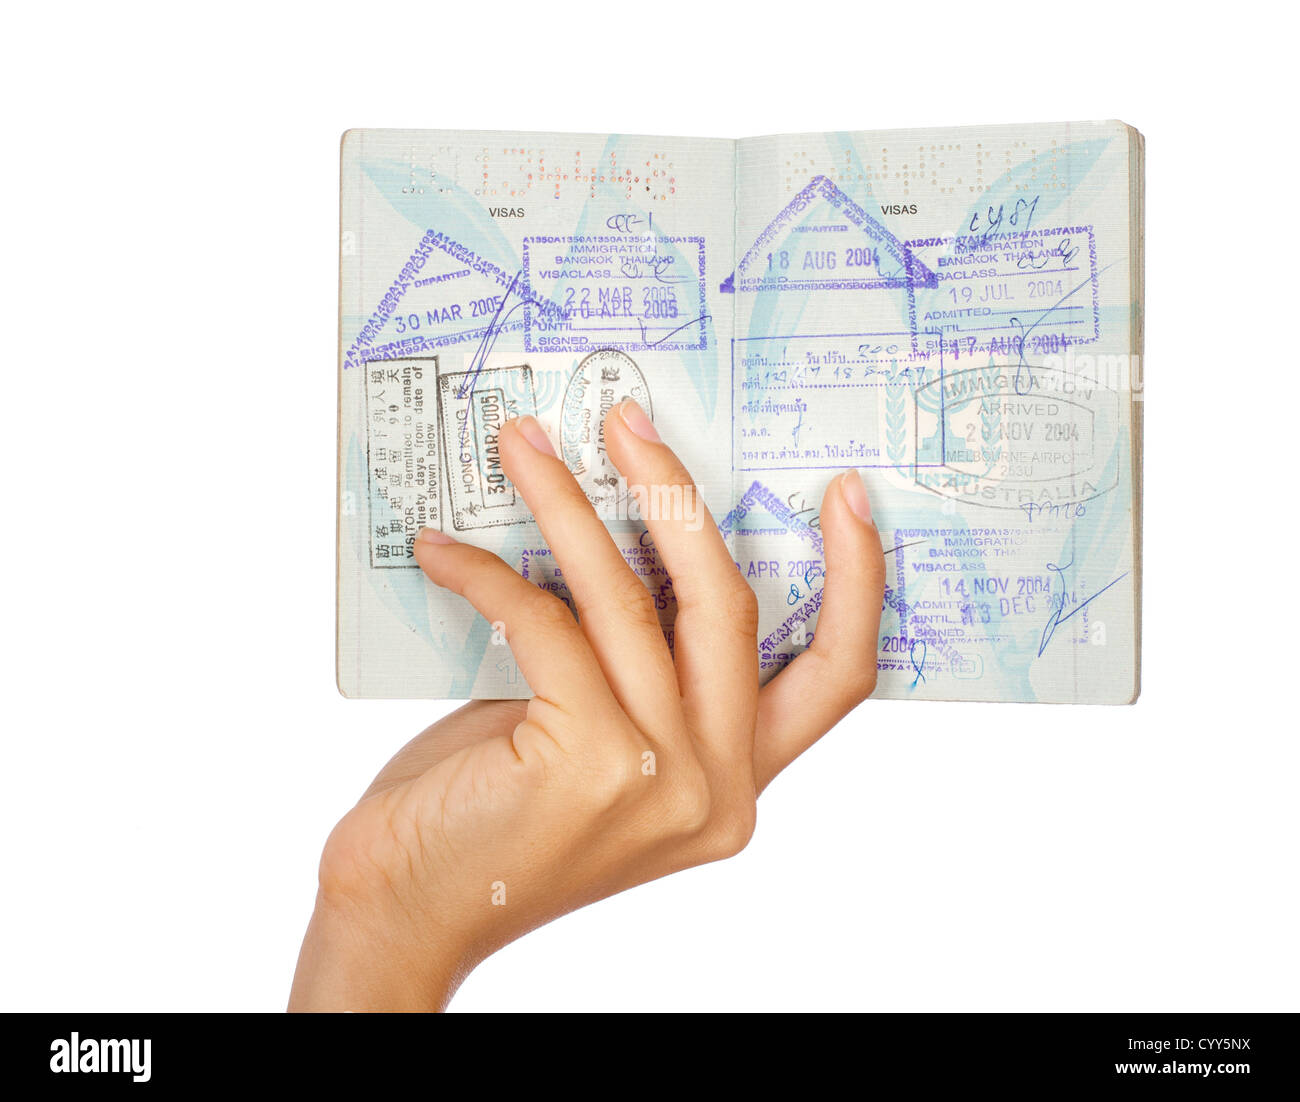 Hand showing passport, close-up shot. Isolated over white background. Stock Photo